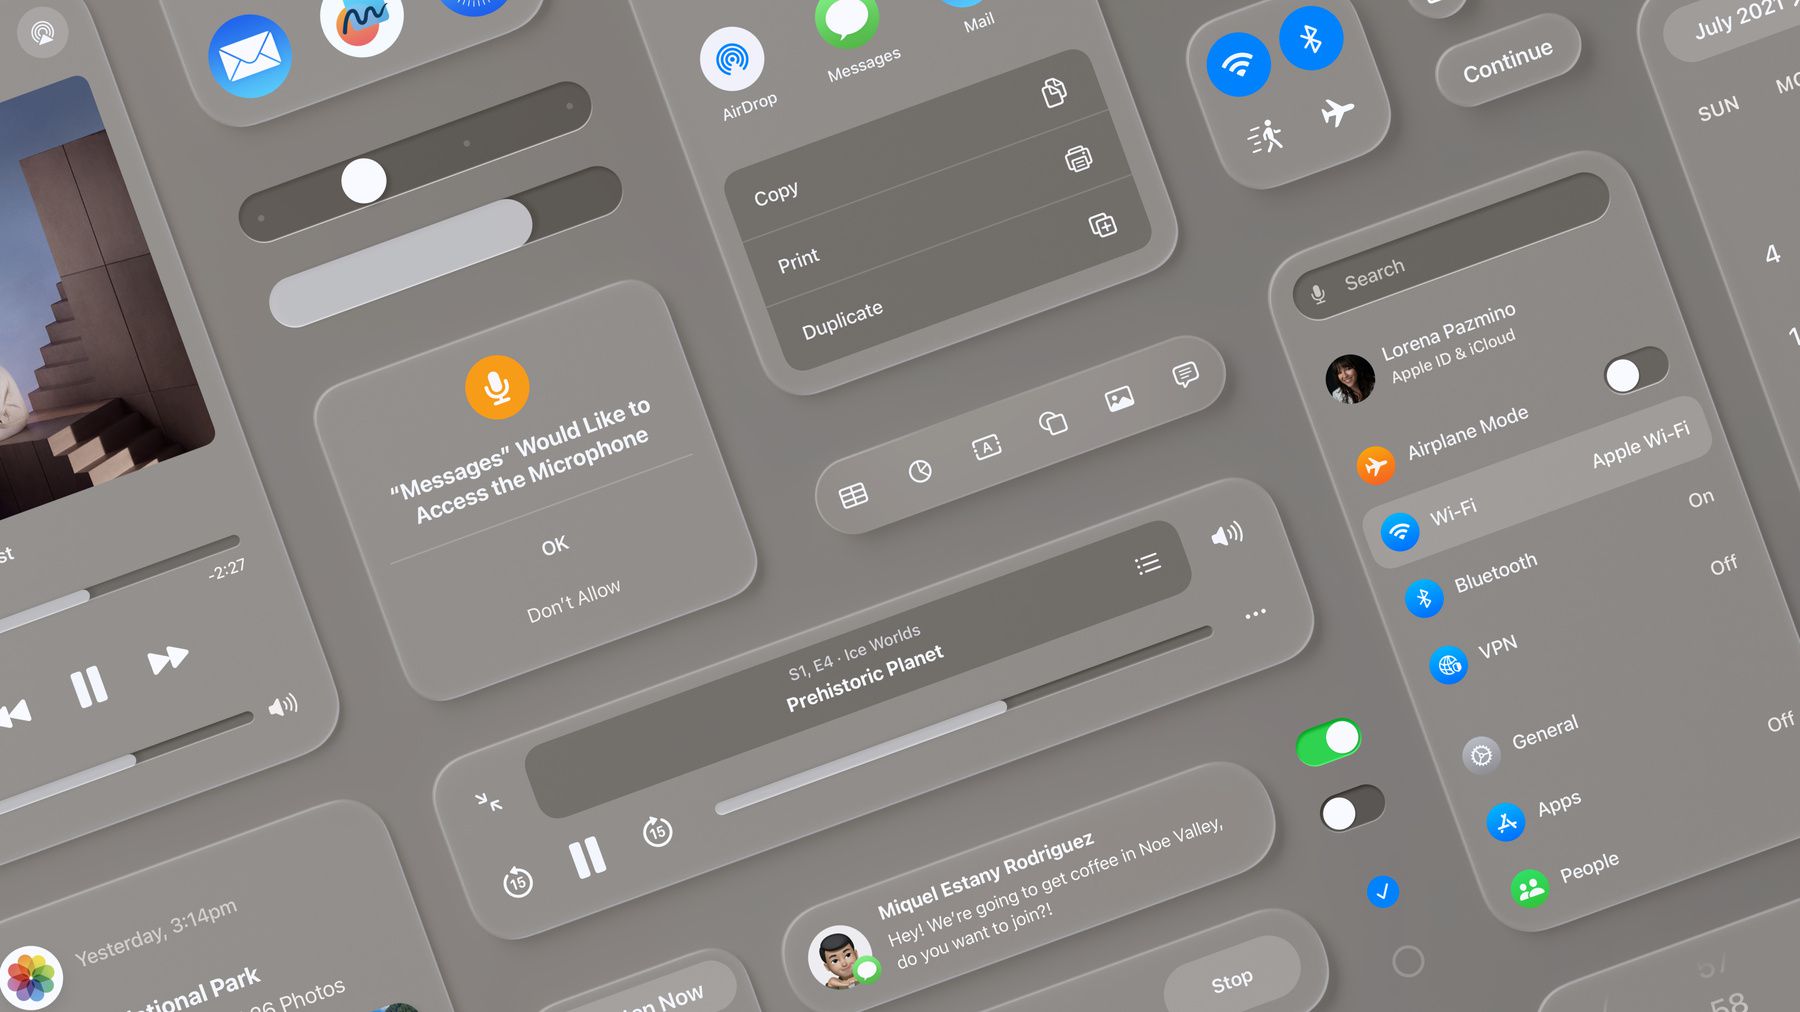 Sketchy Rumor Says iOS 18 Will Have visionOS-Inspired Design Changes